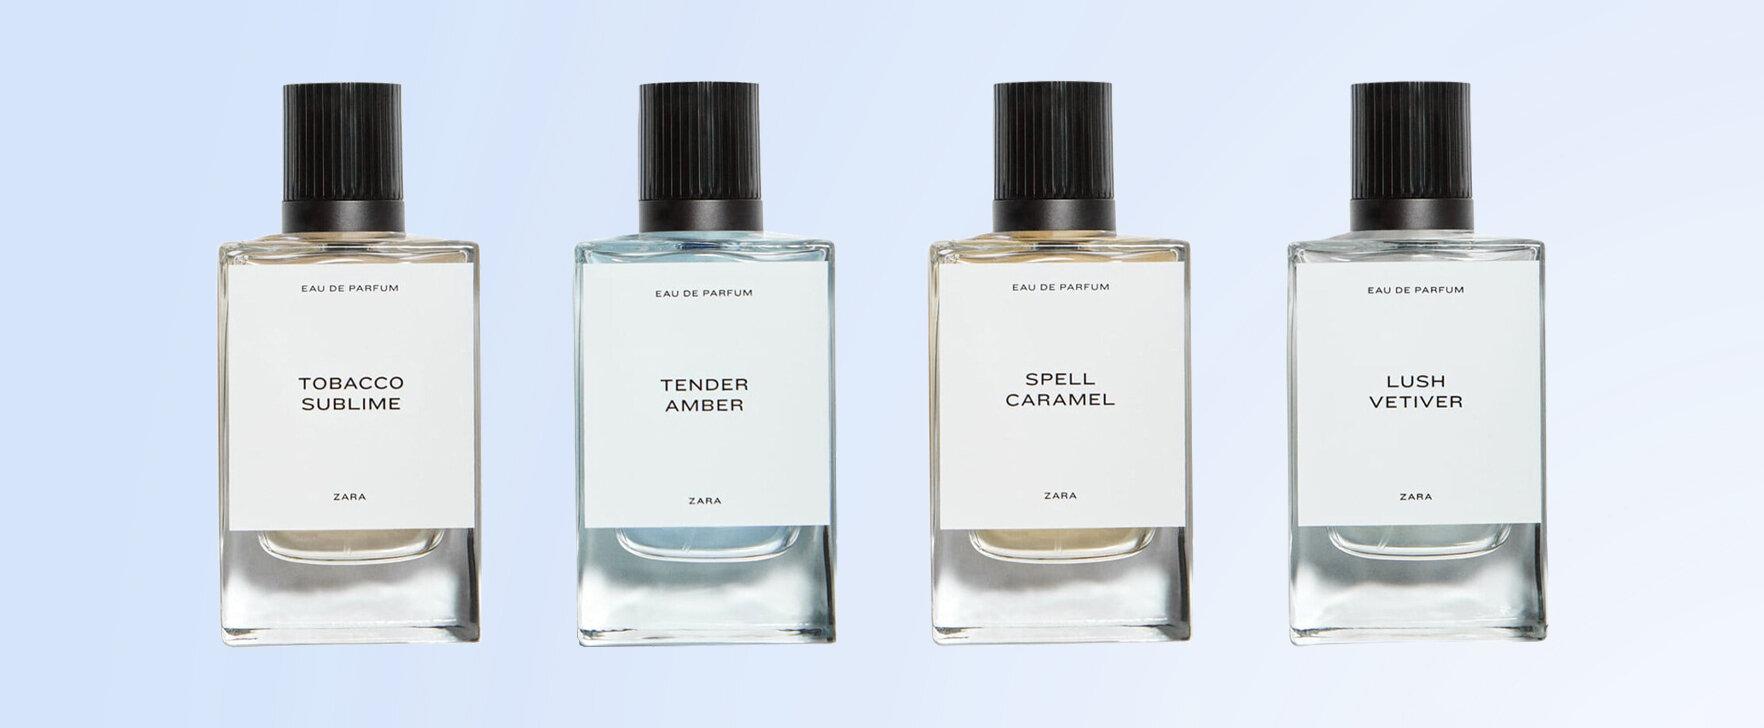 "Tobacco Sublime", "Tender Amber", "Spell Caramel" and "Lush Vetiver": The New Masculine Eaux de Parfum From Zara